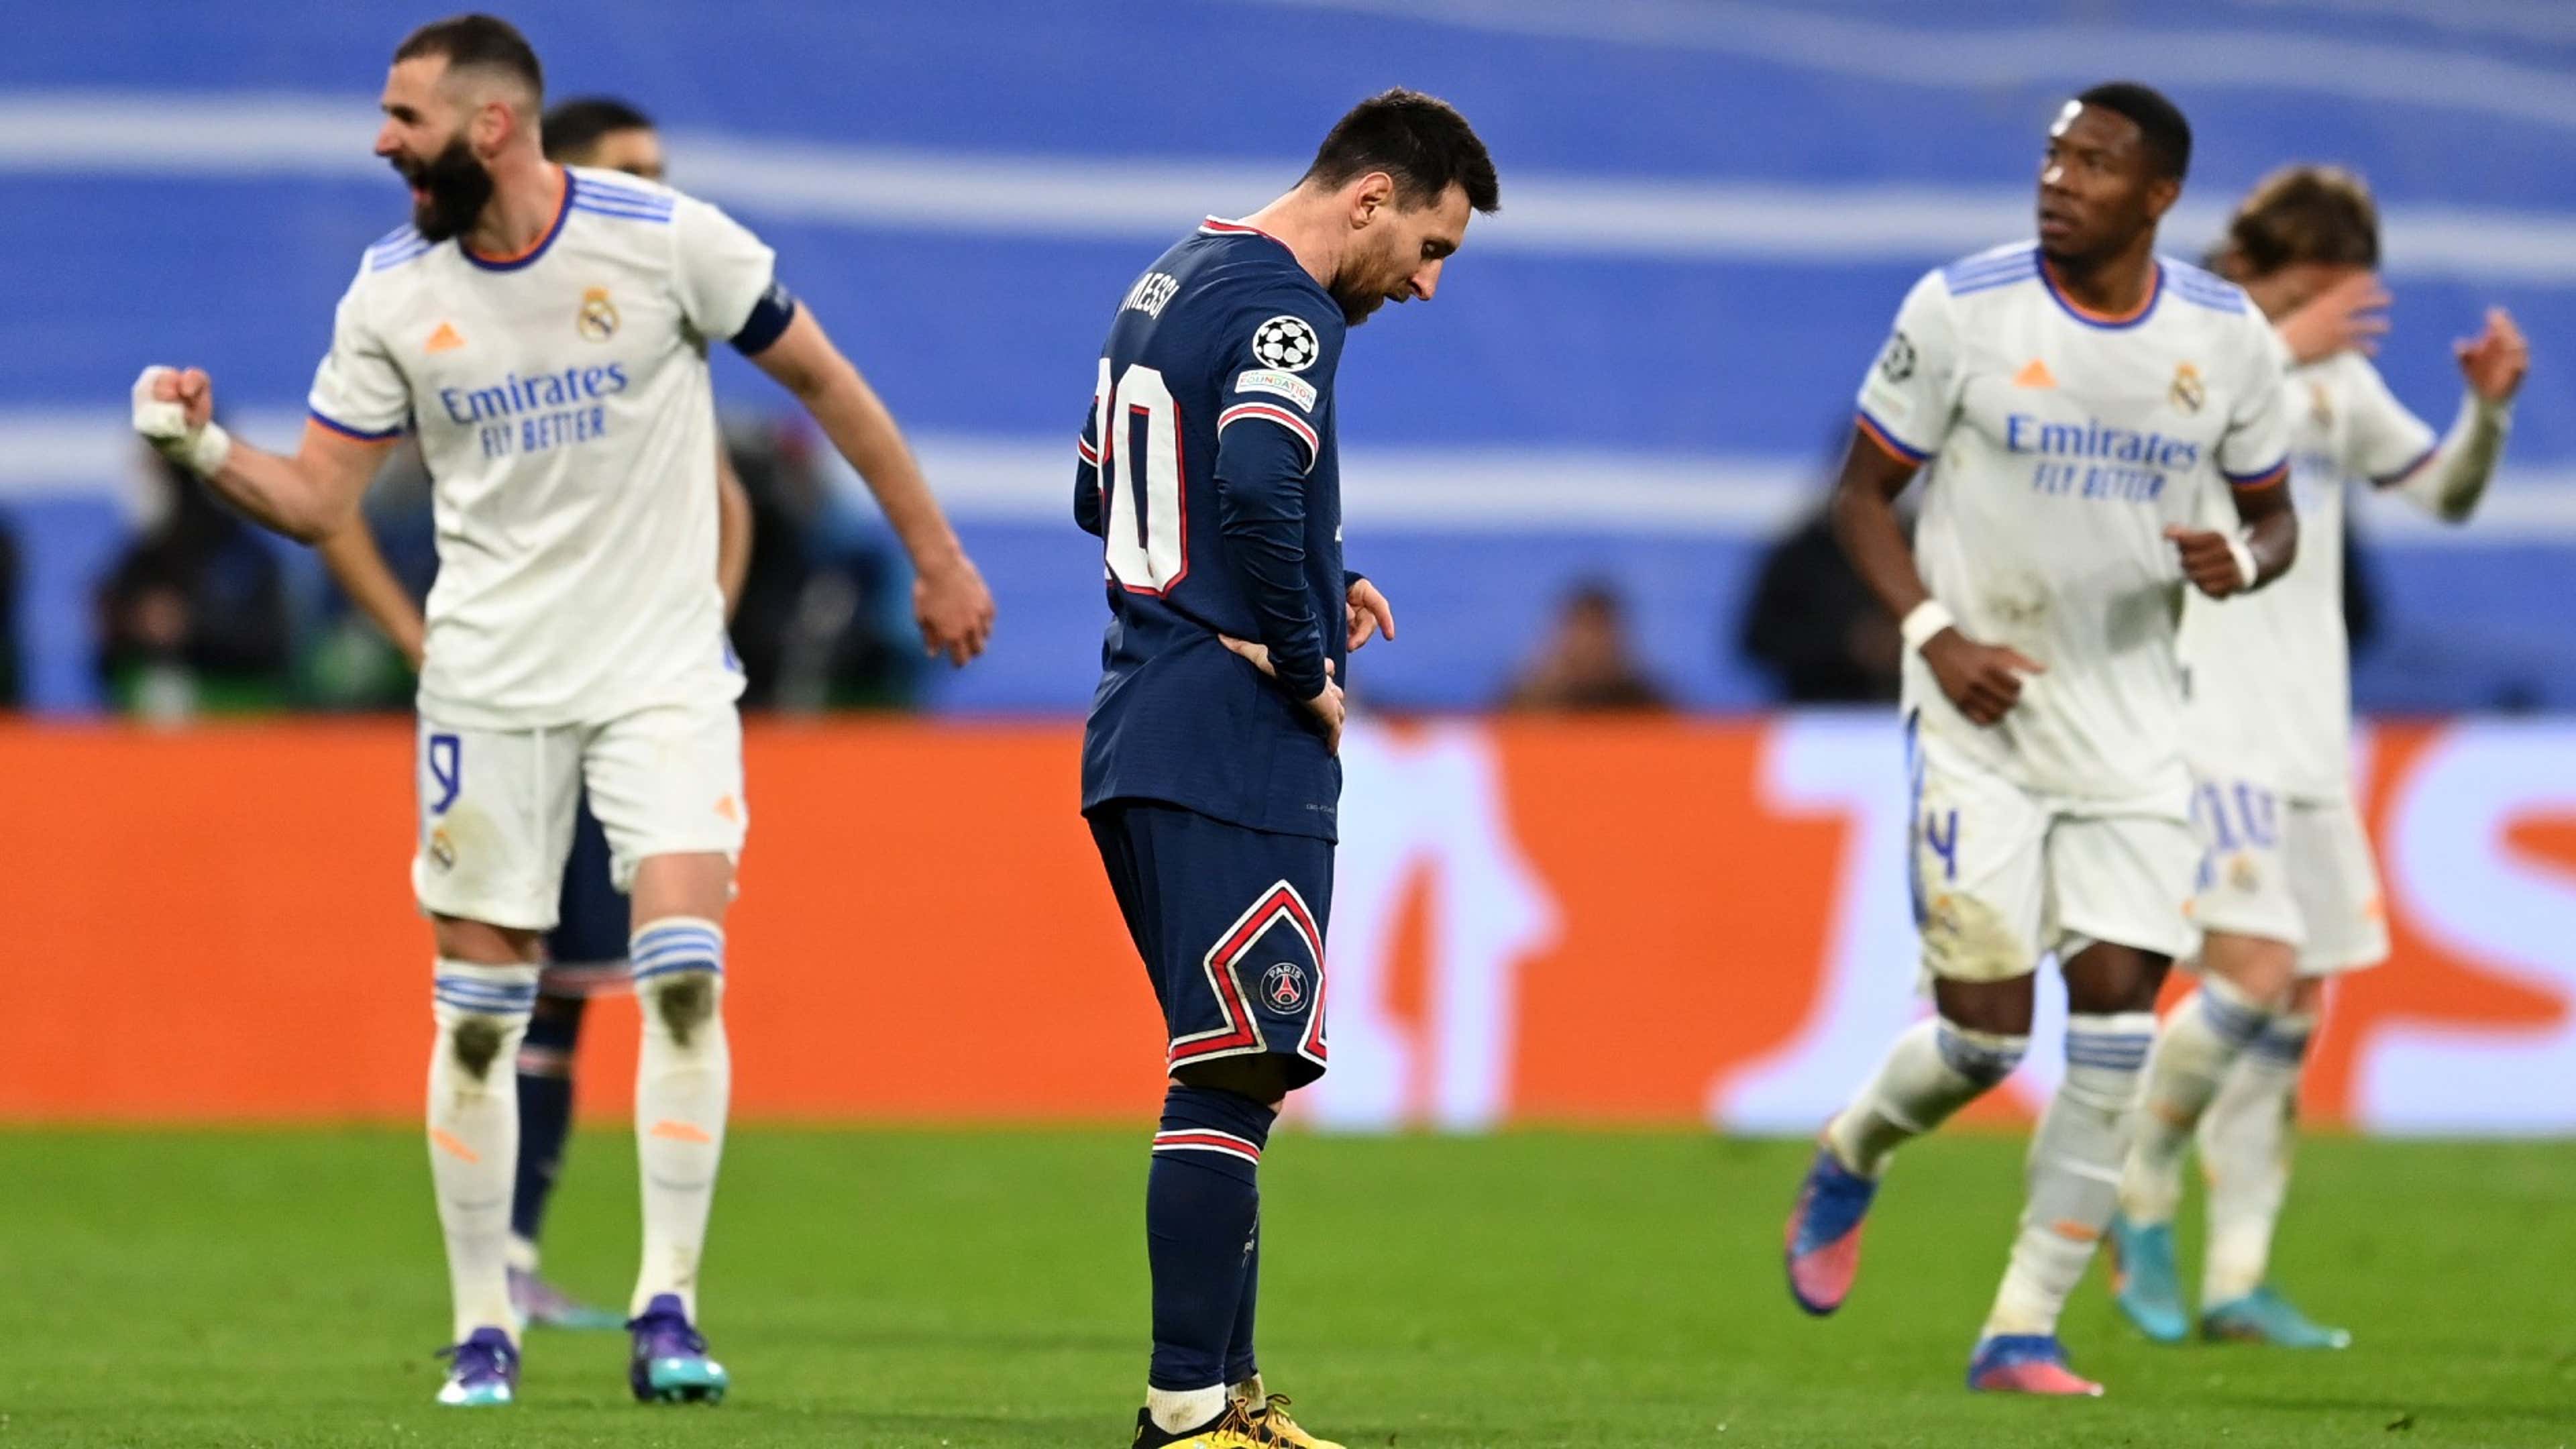 PSG 2-0 Man City: Messi scores first goal for his new club to down Citizens